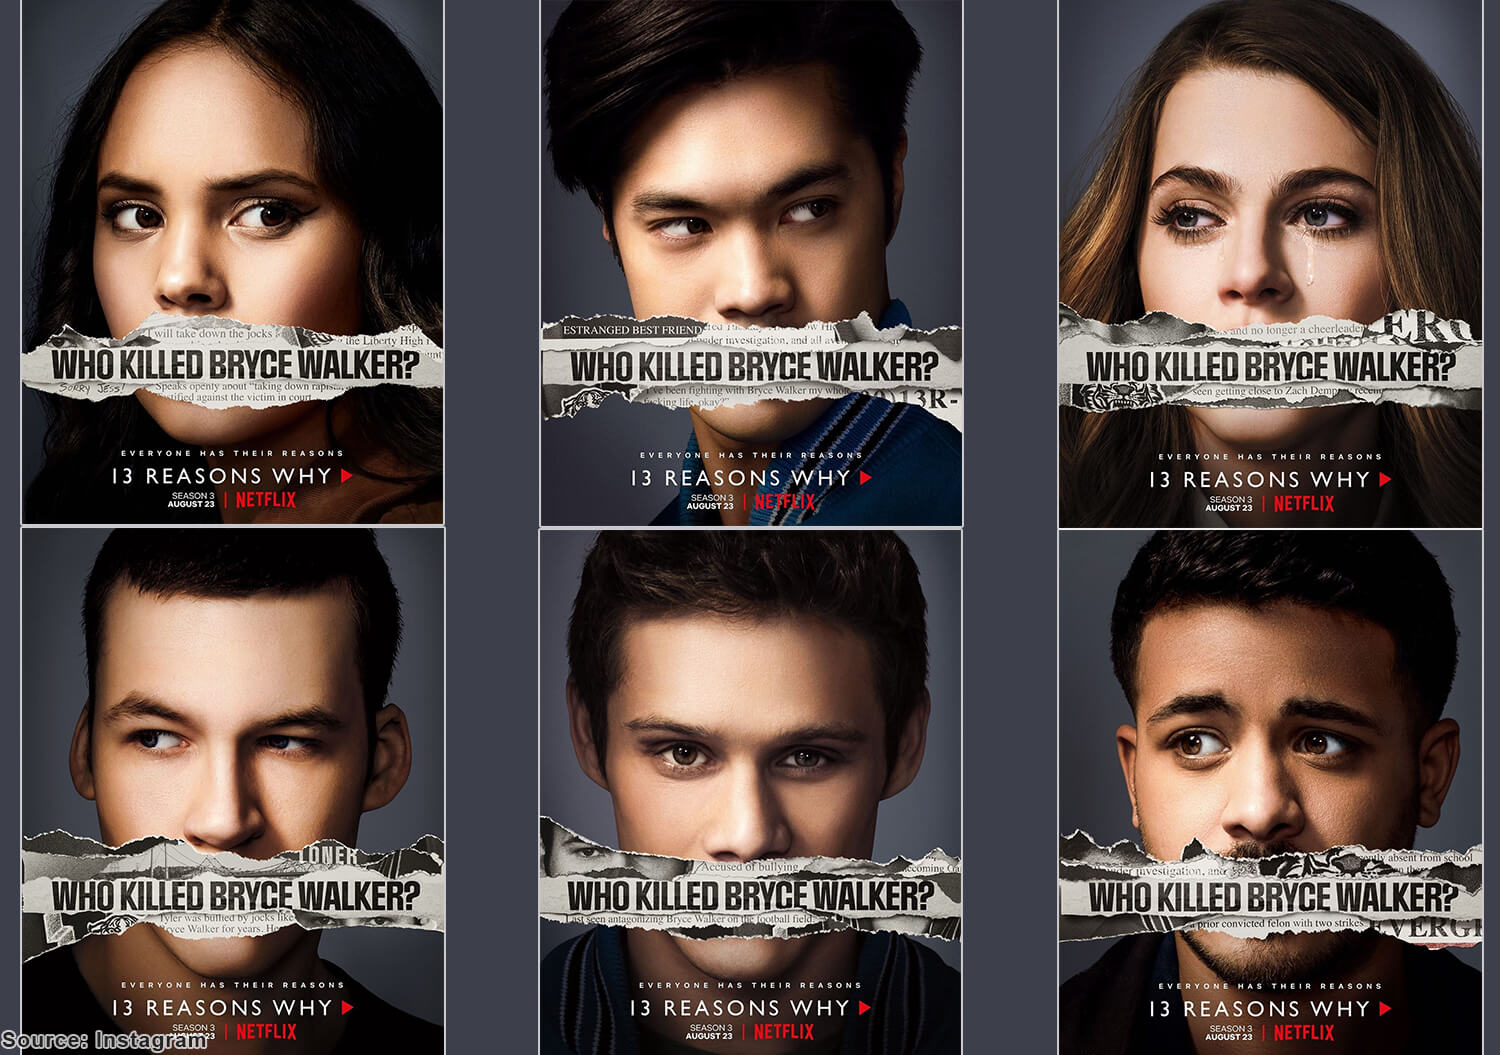 13 Reasons Why Season 3 Trailer Unveiled With A New Question